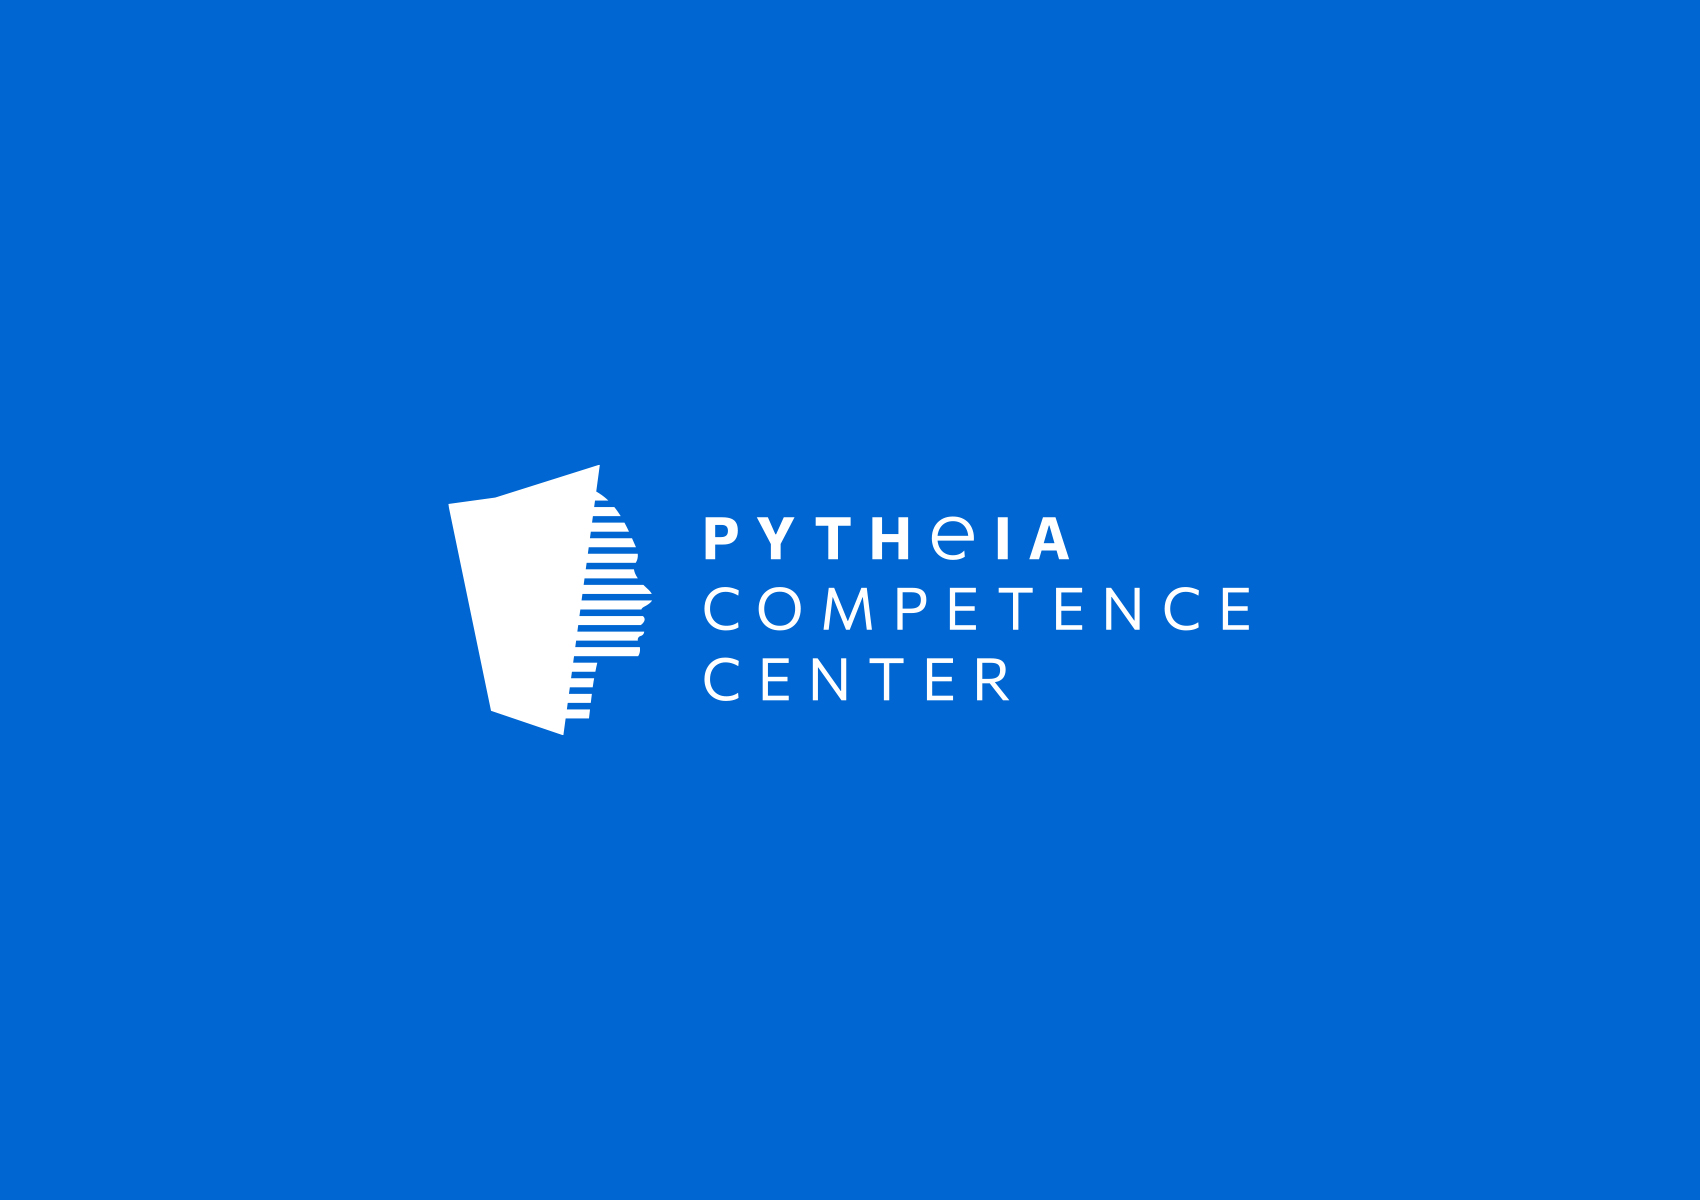 PYTHeIA Competence Center main logo 1700x1200 by xhristakis